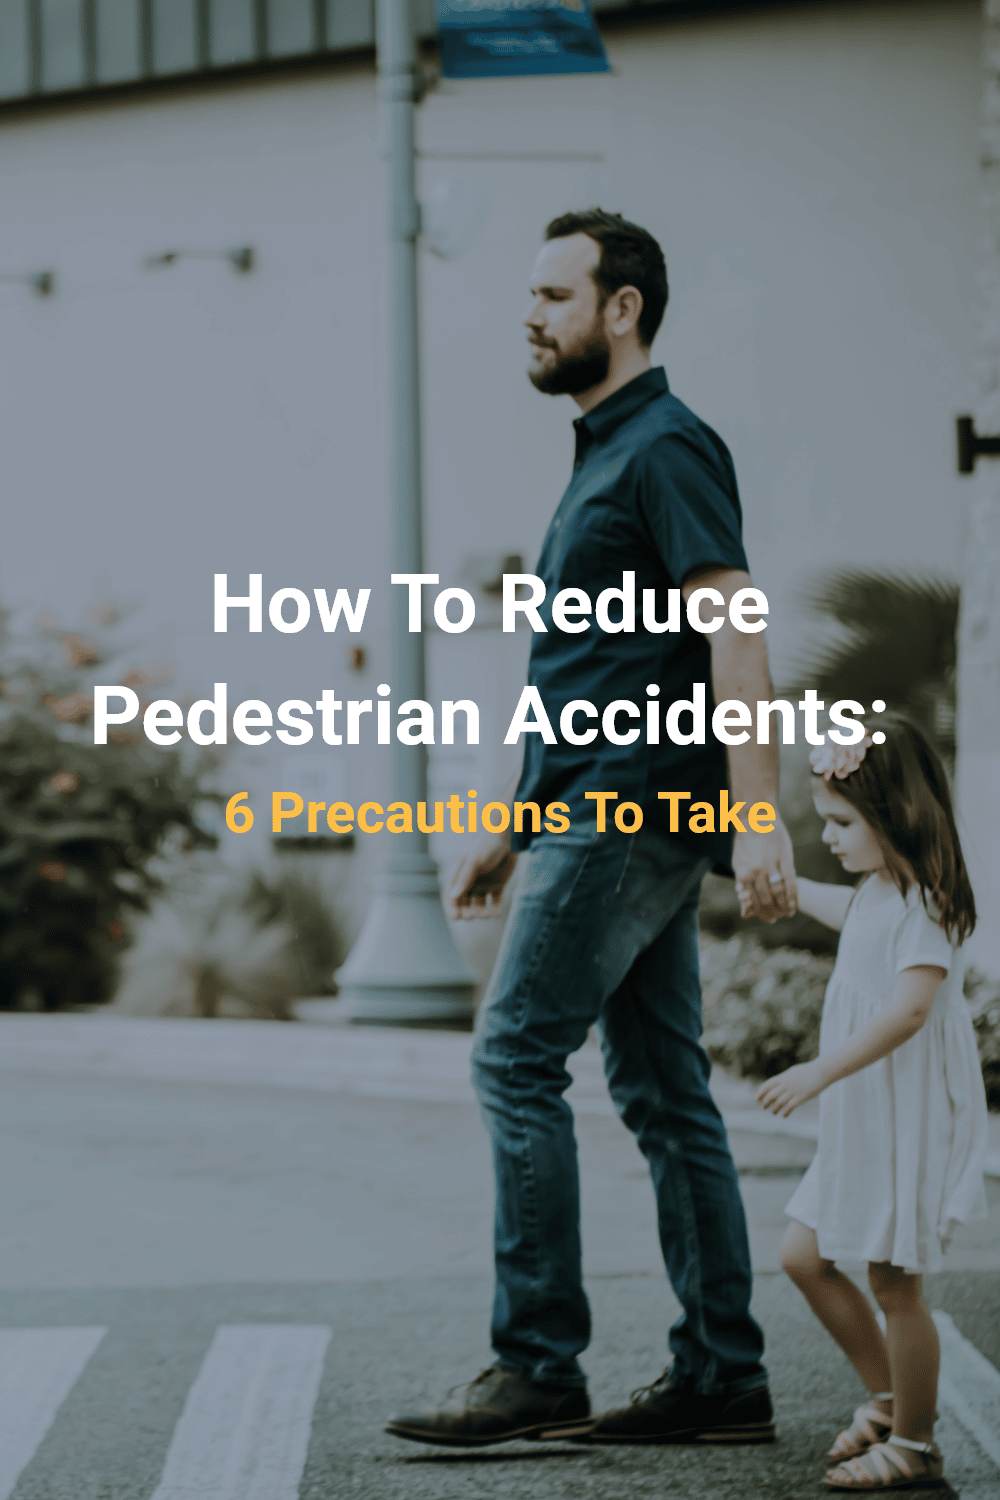 How To Reduce Accidents